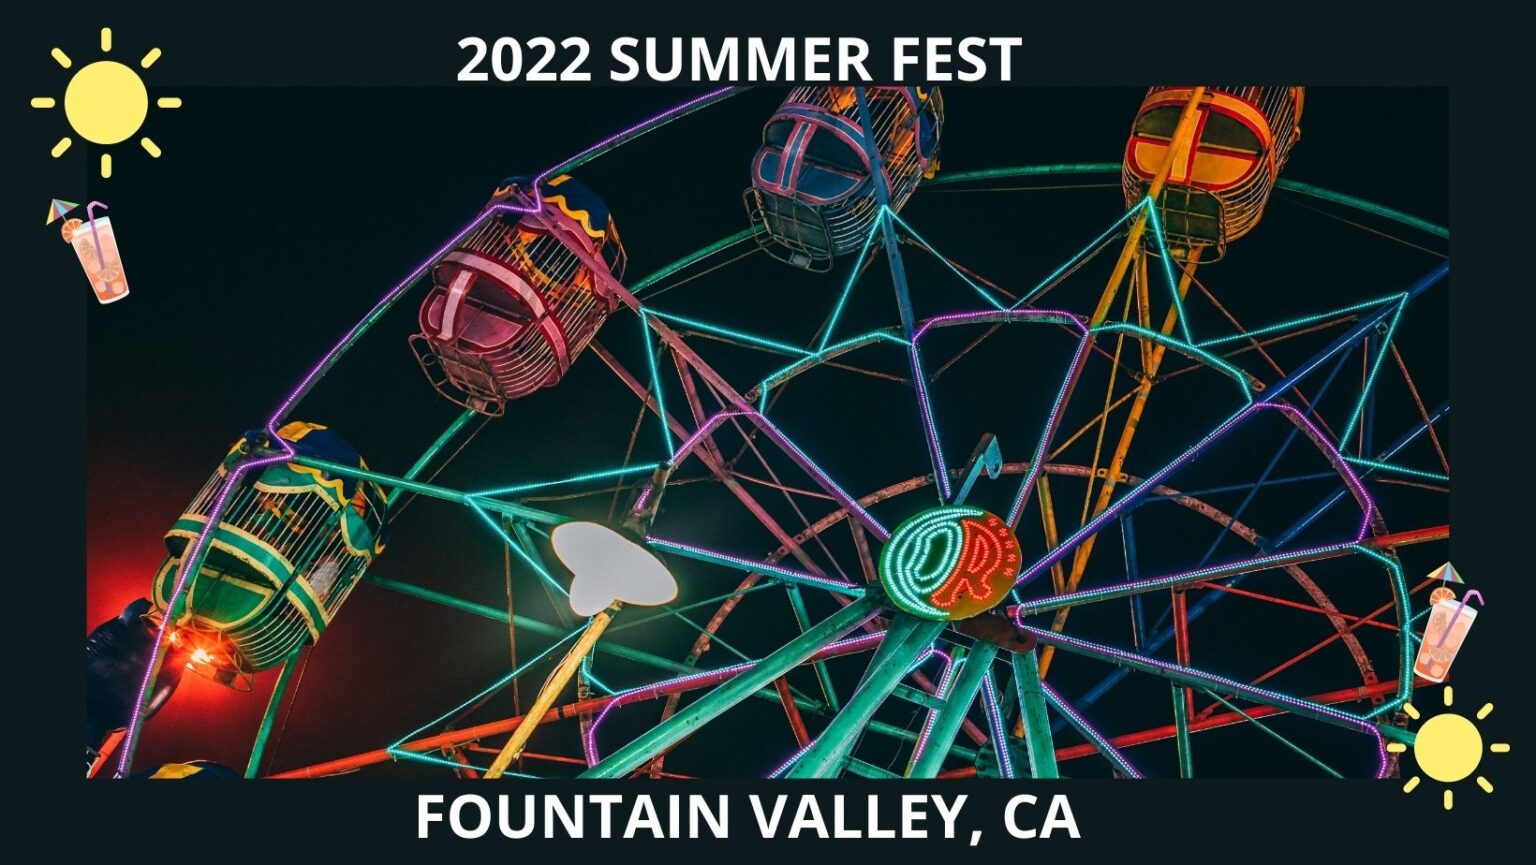 2022 Fountain Valley Summerfest - Fireworks, Carnival Rides, Live Music